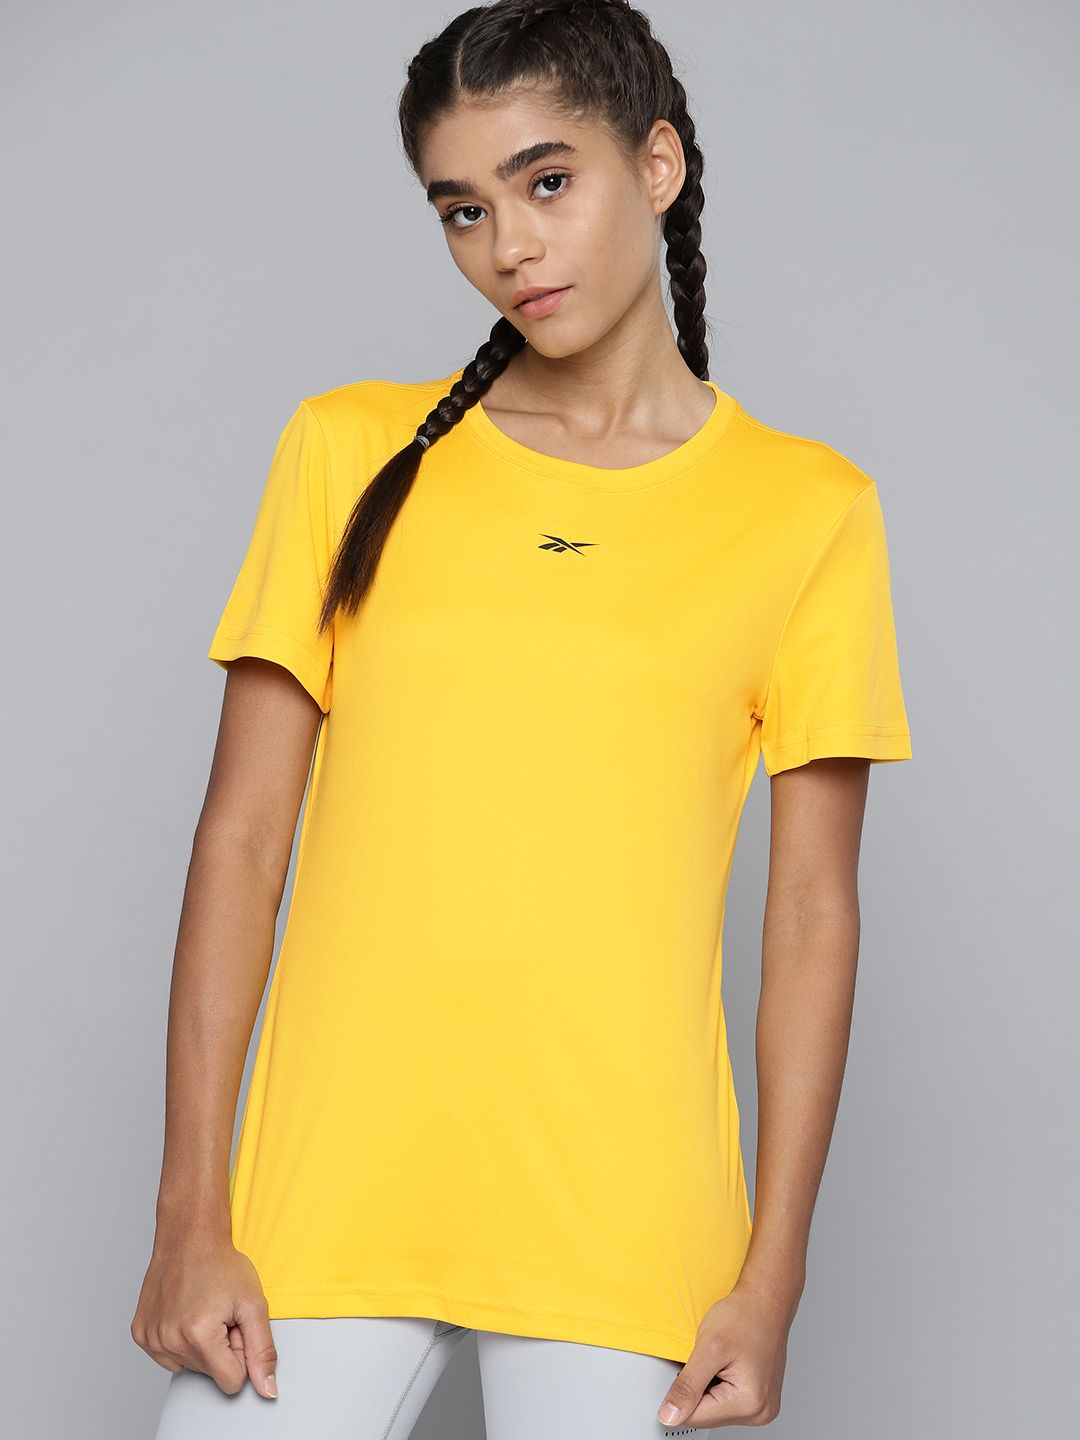 Reebok Women Yellow Solid Training or Gym T-shirt Price in India